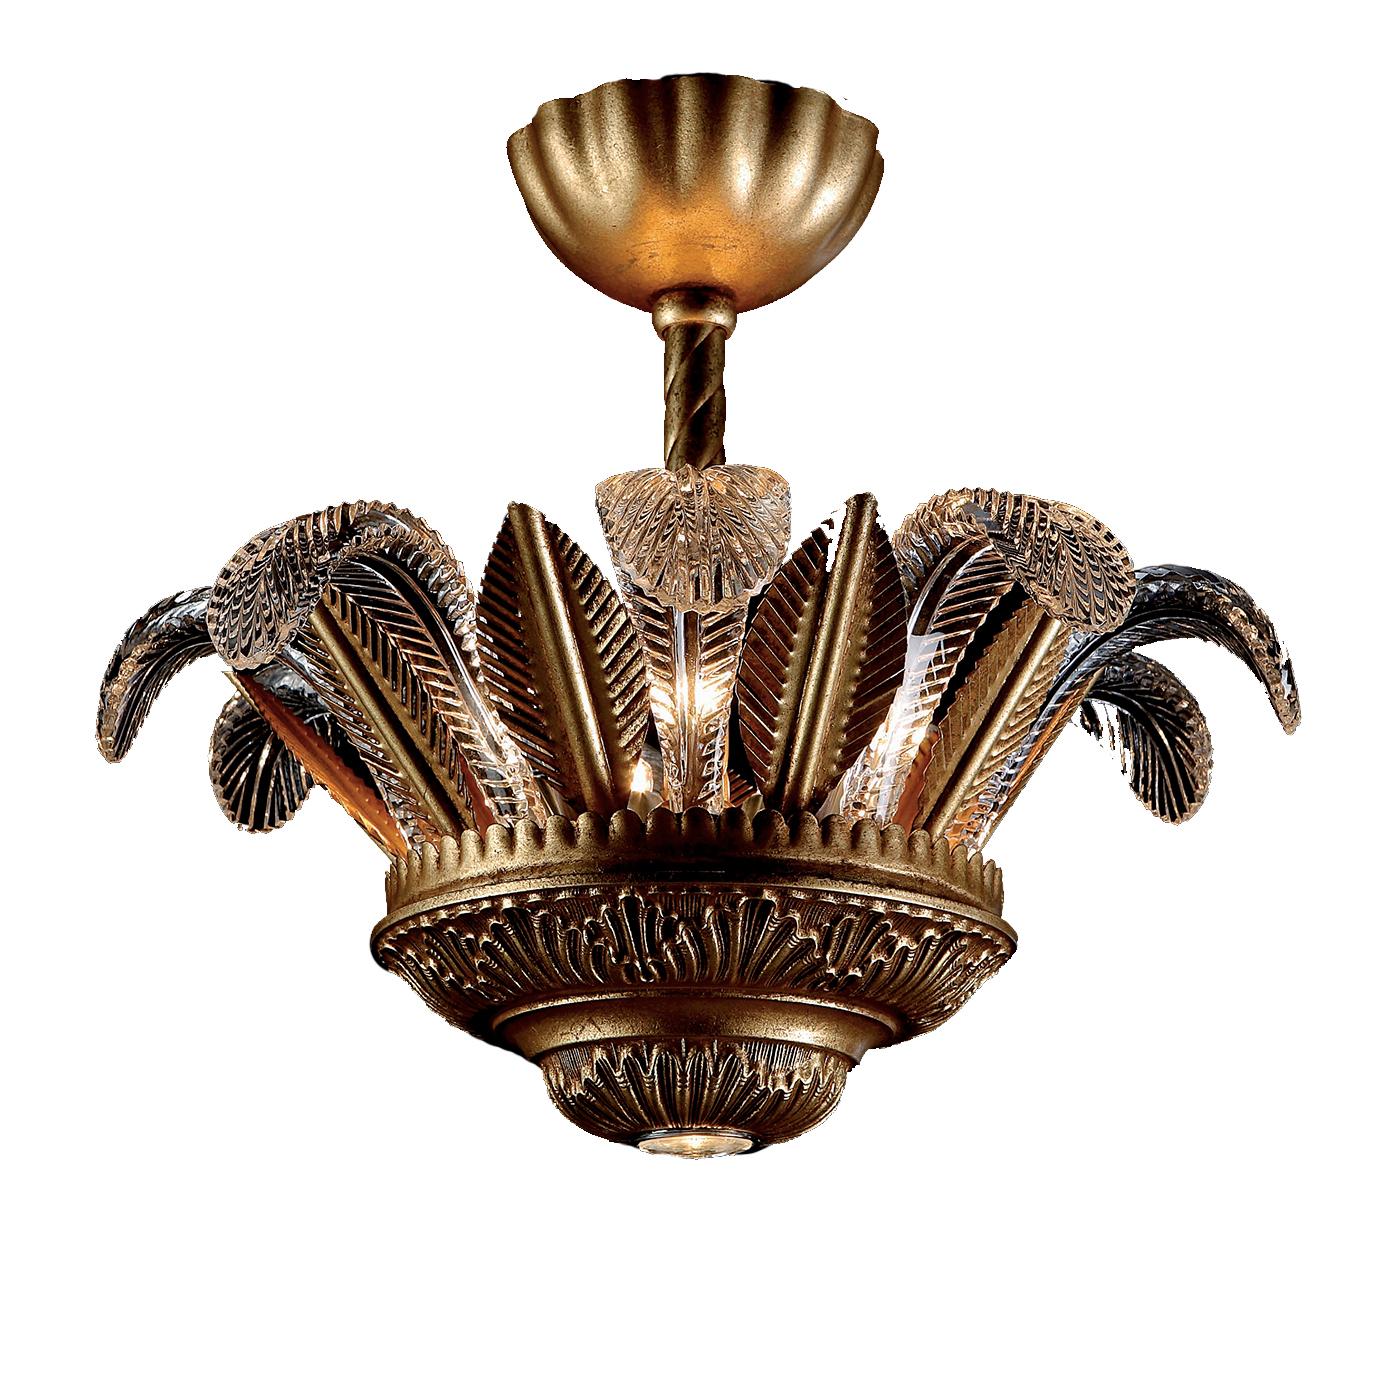 A superb addition to any home, this ceiling lamp is inspired by Art Deco and crafted of hand forged iron and brass. The standout element of this piece is its Bohemian crystal decoration, masterfully-crafted in the shape of leaves that stem from the